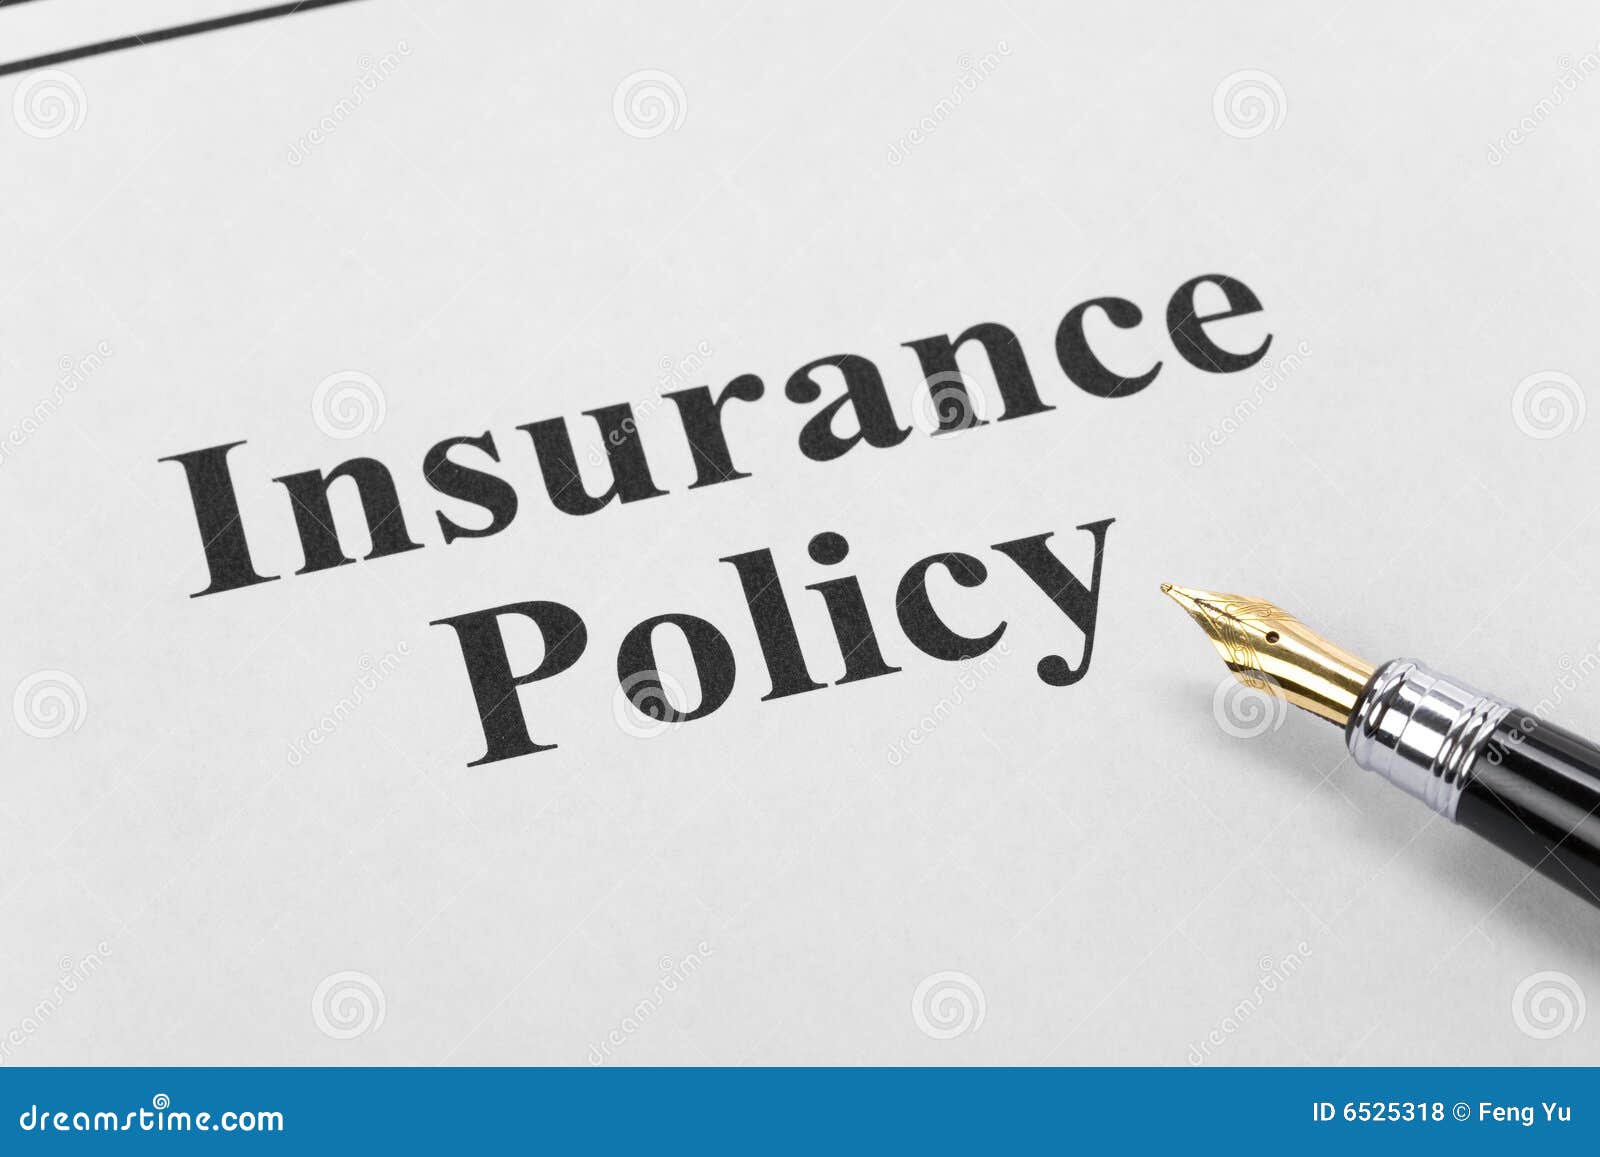 Insurance Policy Royalty Free Stock Photos - Image: 6525318